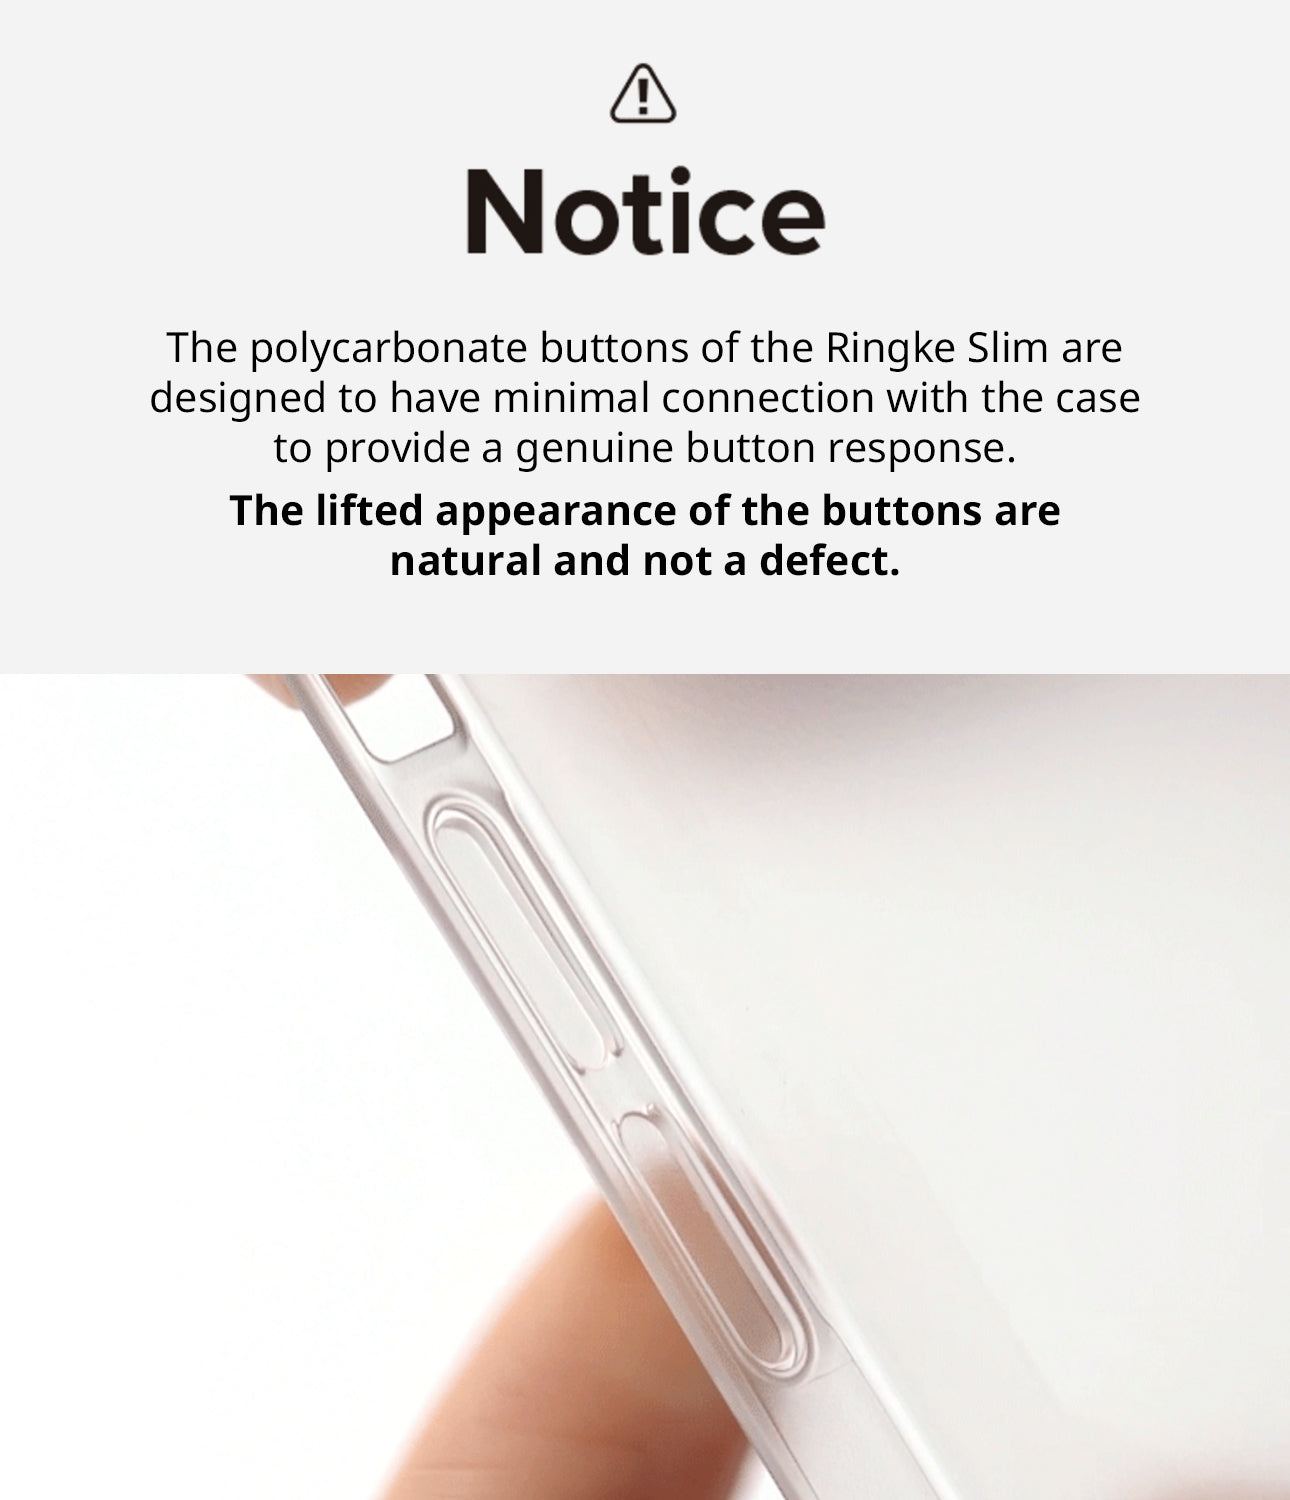 iPhone 14 Case | Slim - Notice. The polycarbonate buttons of the Ringke Slim are designed to have minimal connection with the case to provide a genuine button response. The lifted appearance of the buttons are natural and not a defect.